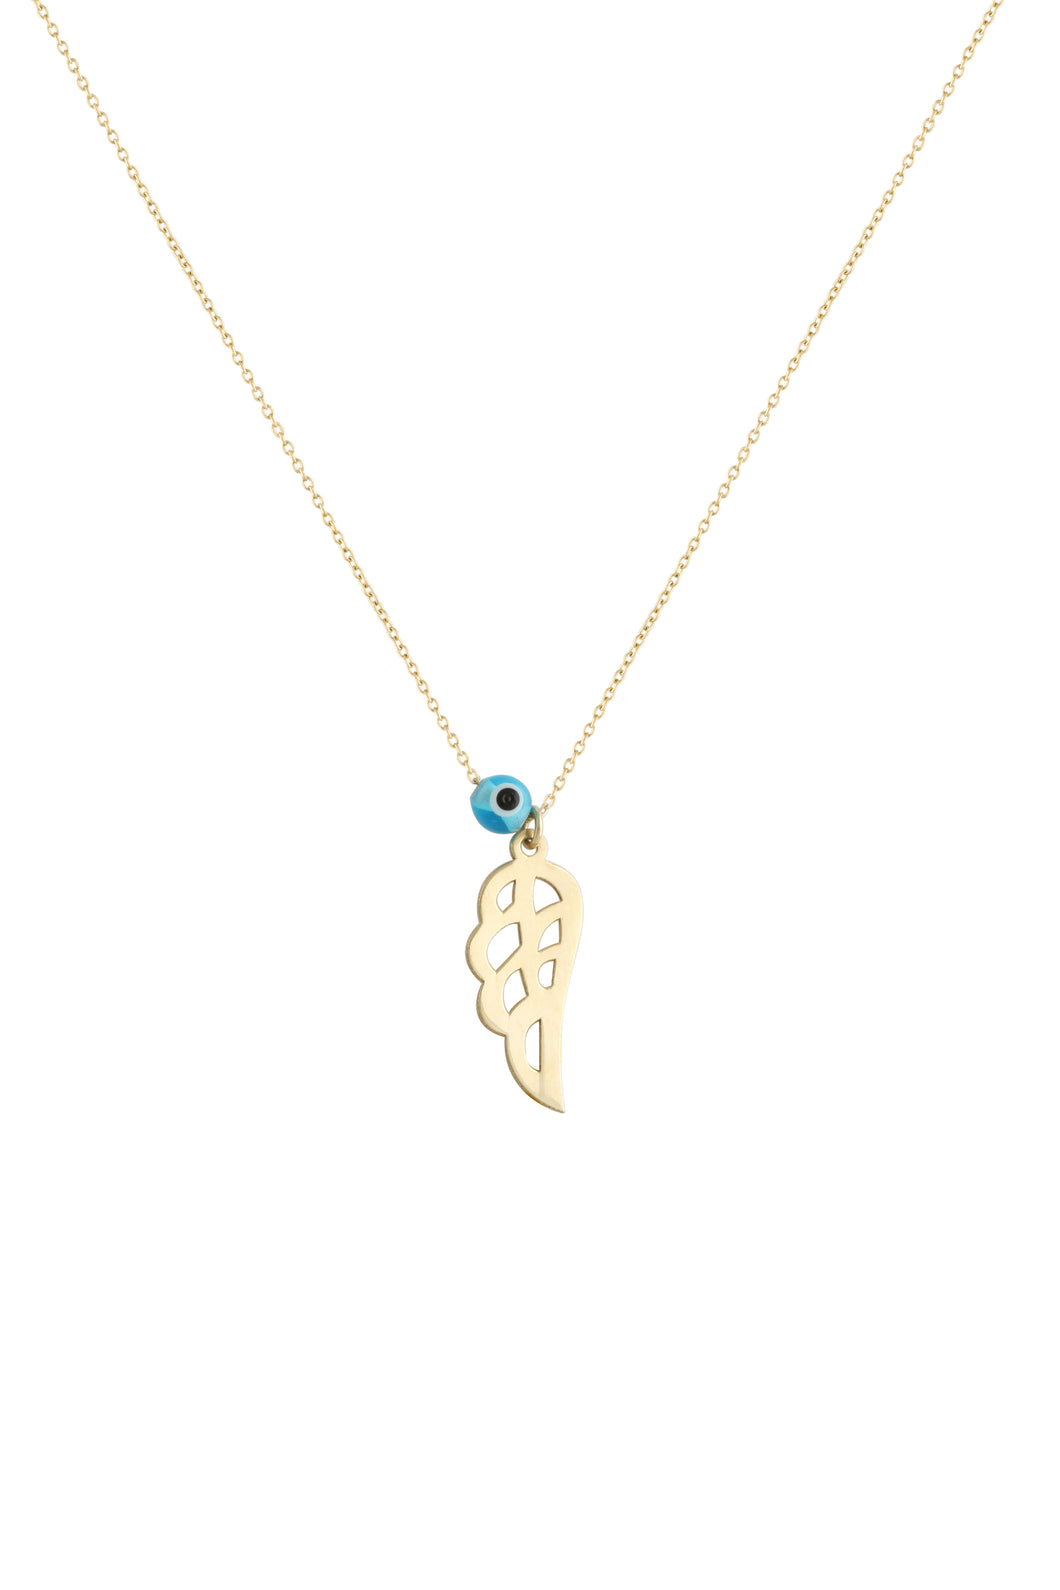 Gold Angel Wing Necklace